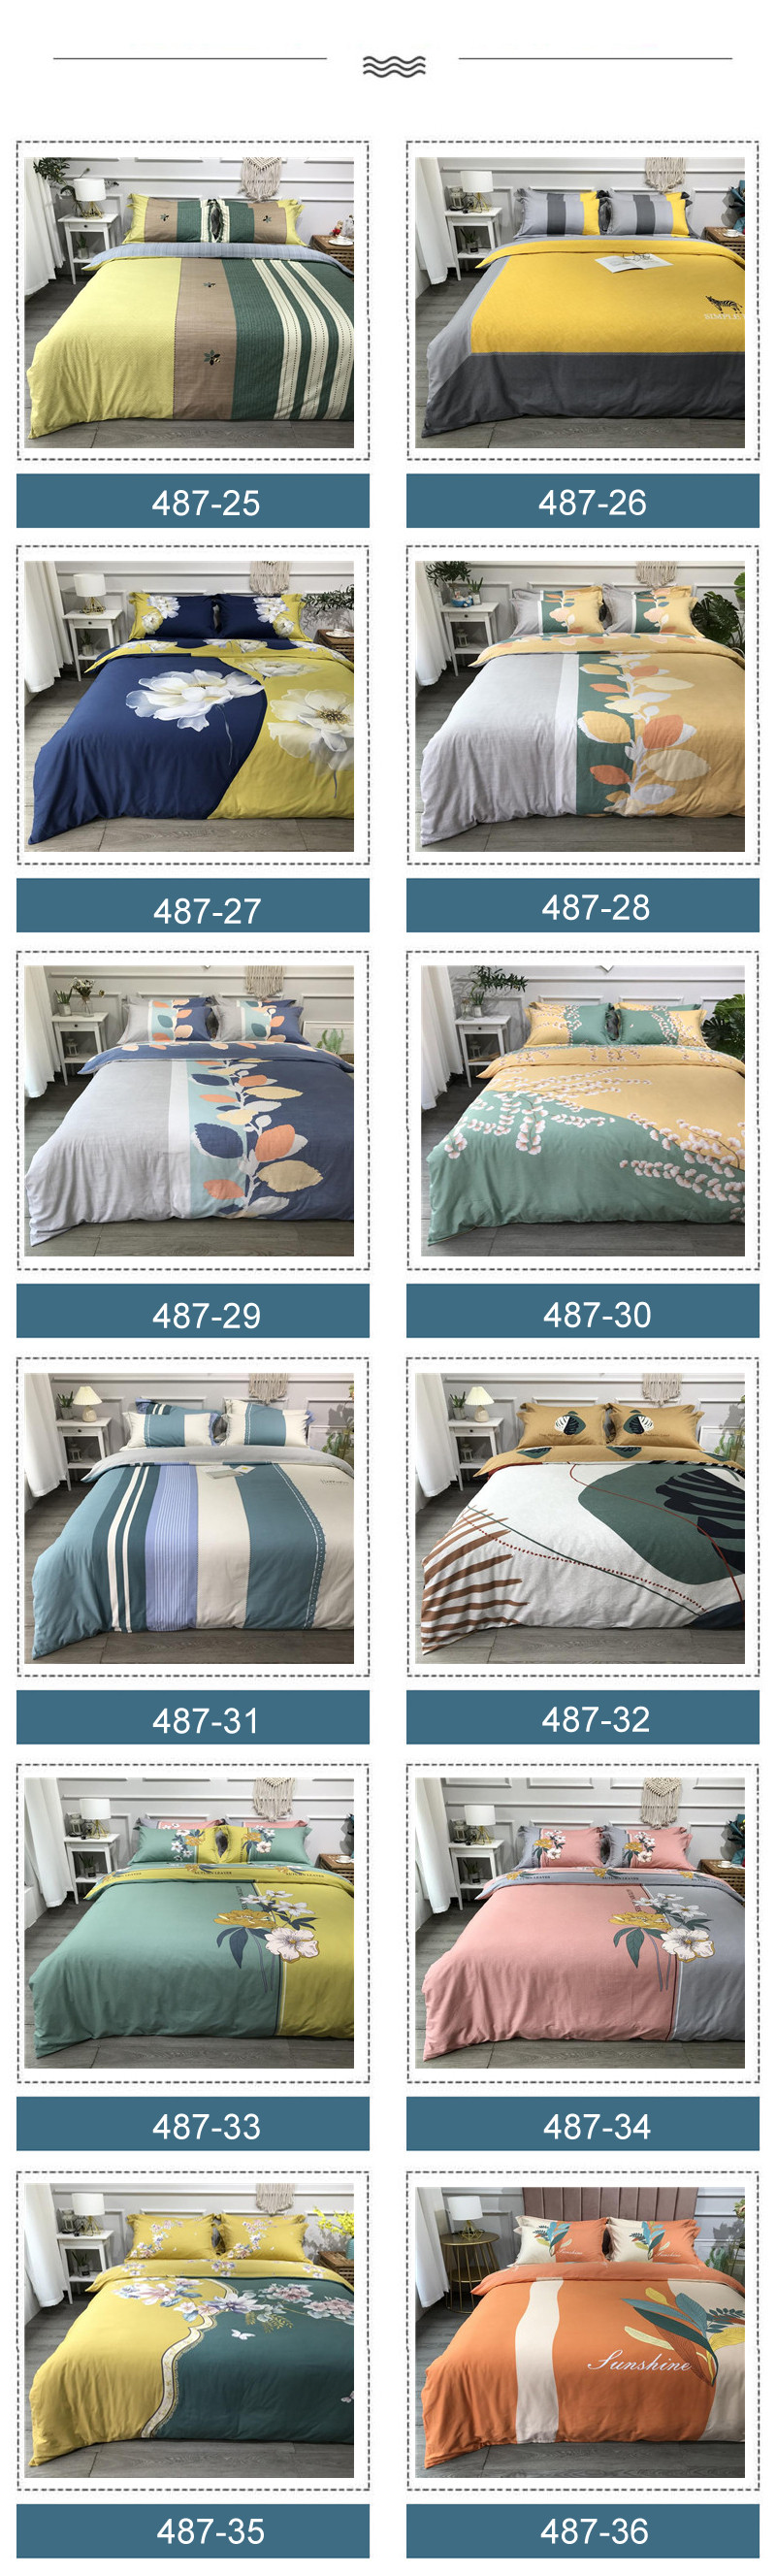 100% cotton Home Sheets And Bedding